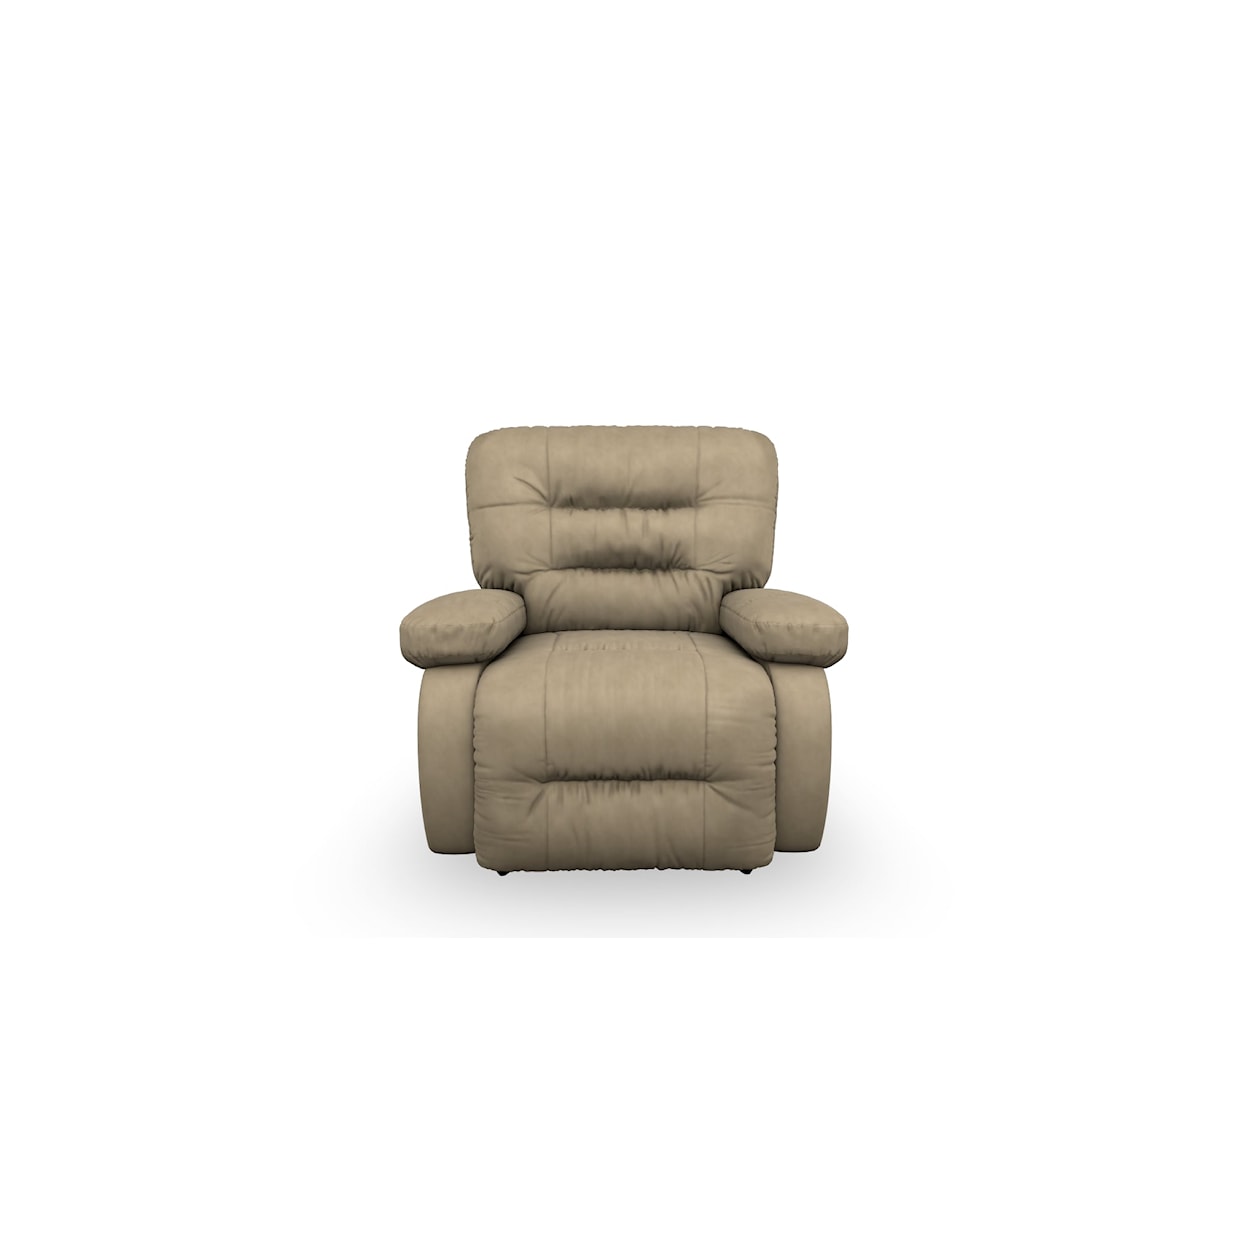 Best Home Furnishings Maddox Space Saver Recliner